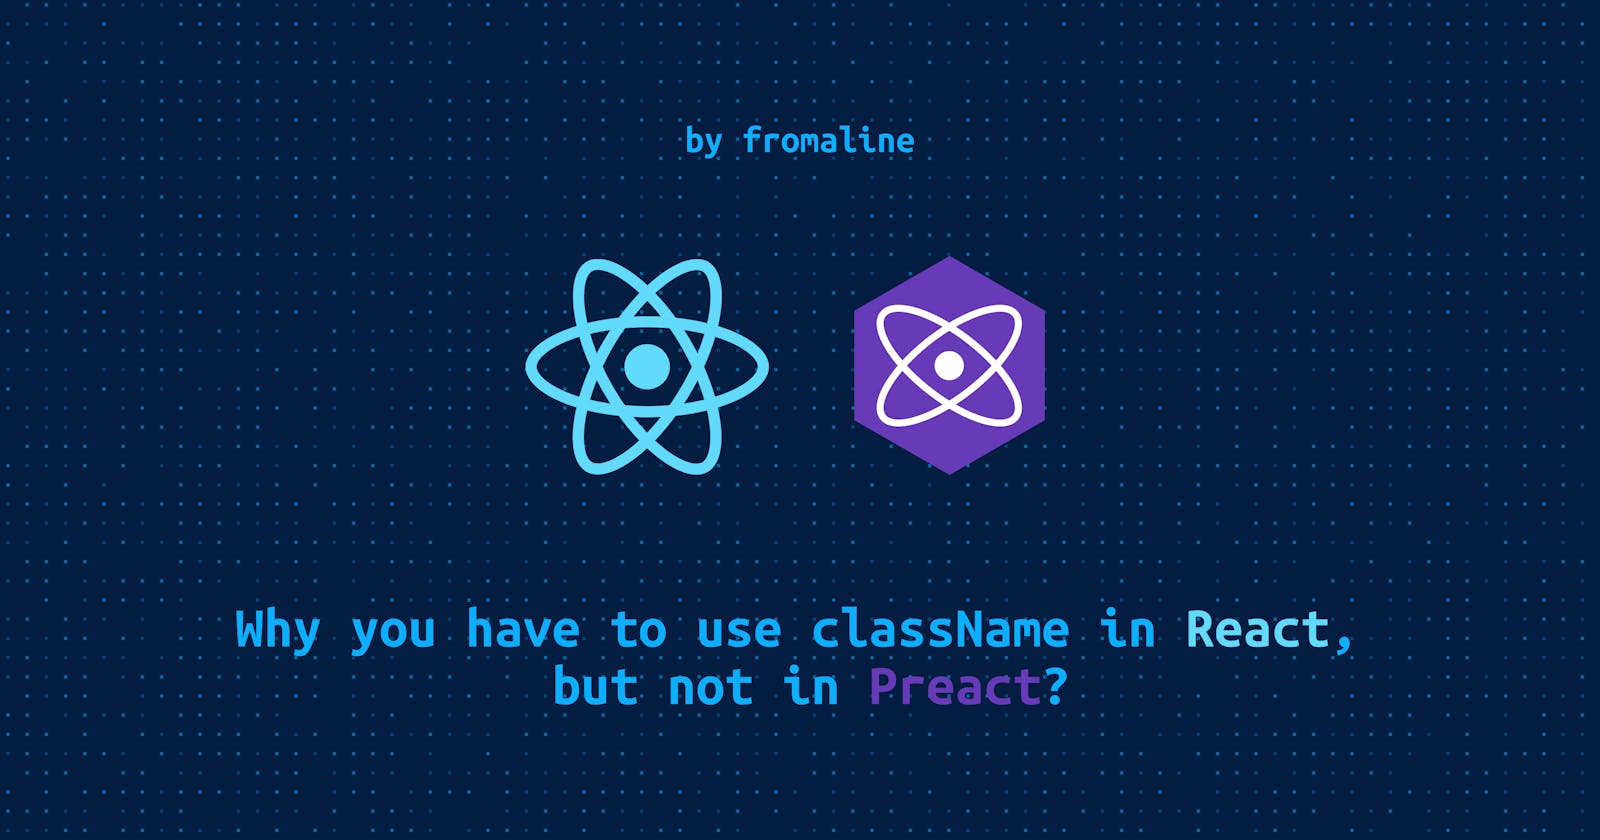 Why you have to use className in React, but not in Preact?